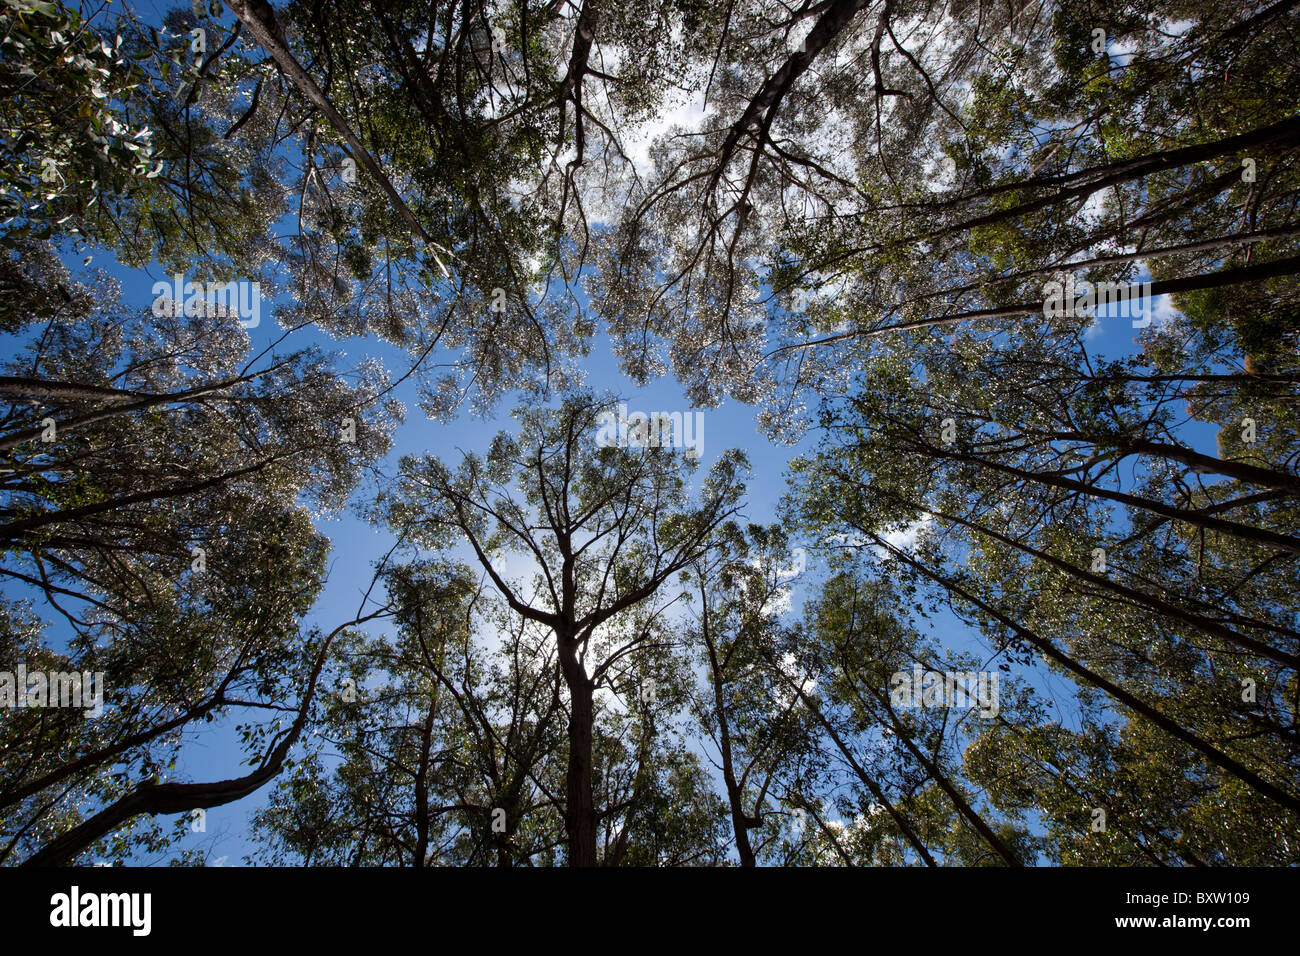 Australia, New South Wales, Lind National Park, Spotted Gum trees (Corymbia maculata) in Eucalyptus forest on summer morning Stock Photo